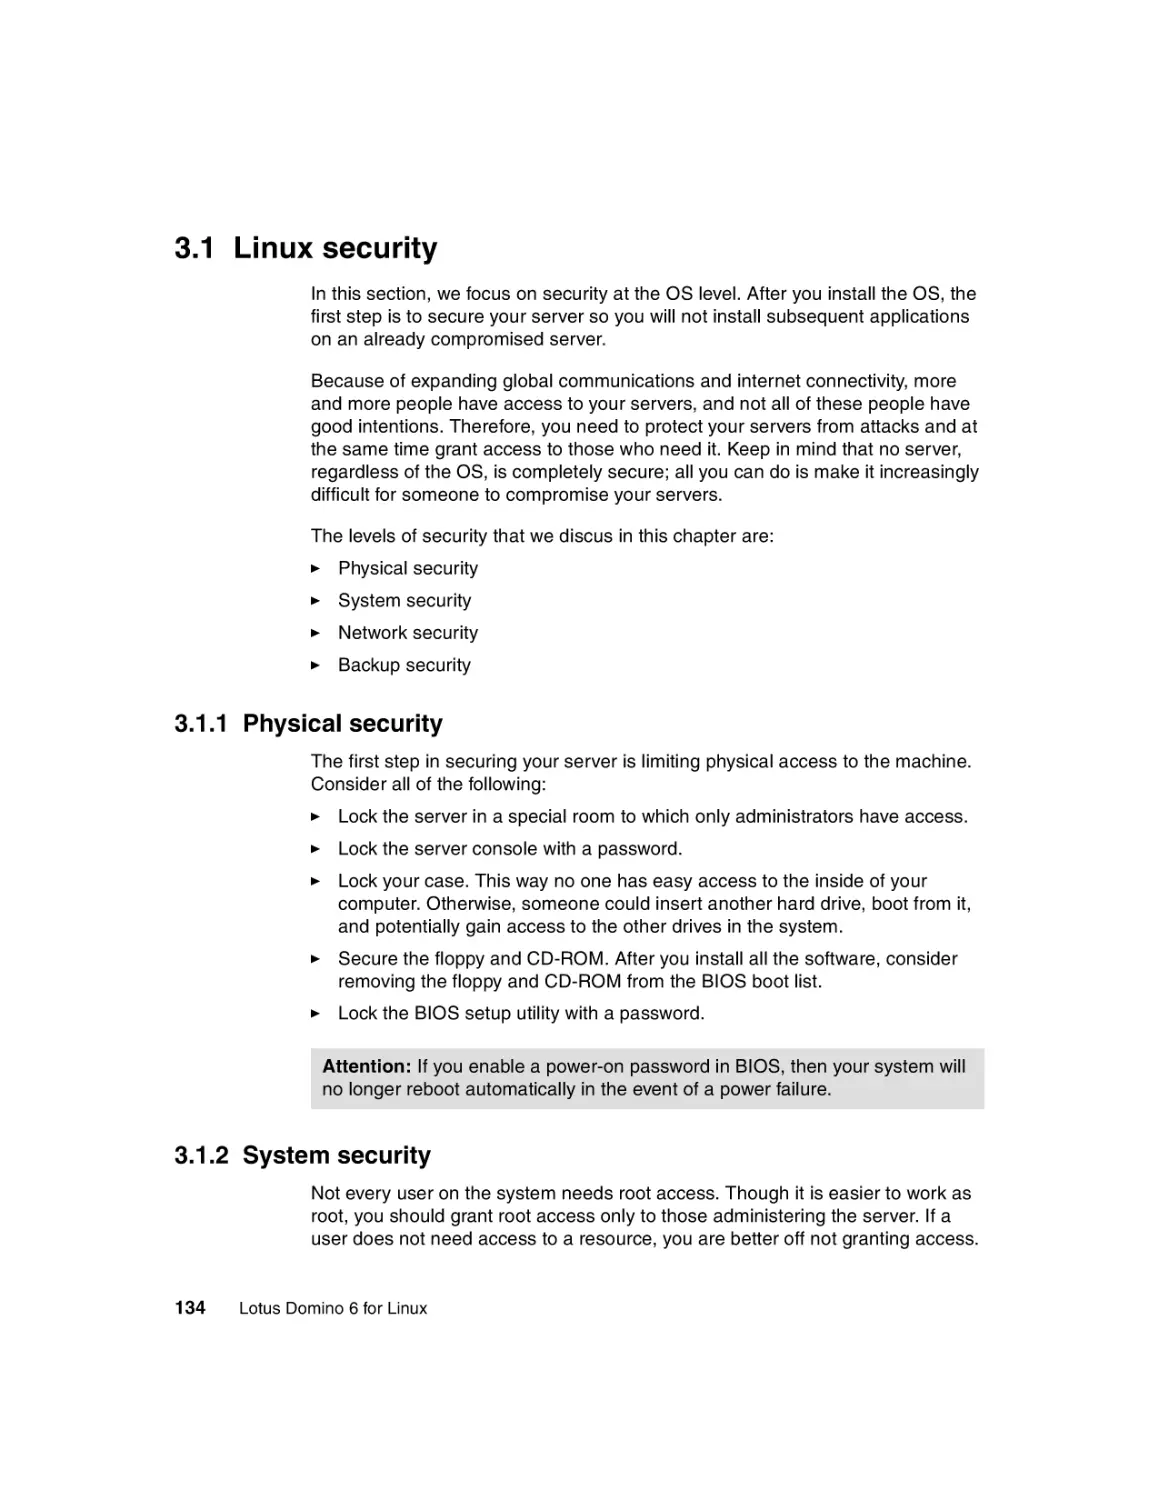 3.1 Linux security
3.1.1 Physical security
3.1.2 System security